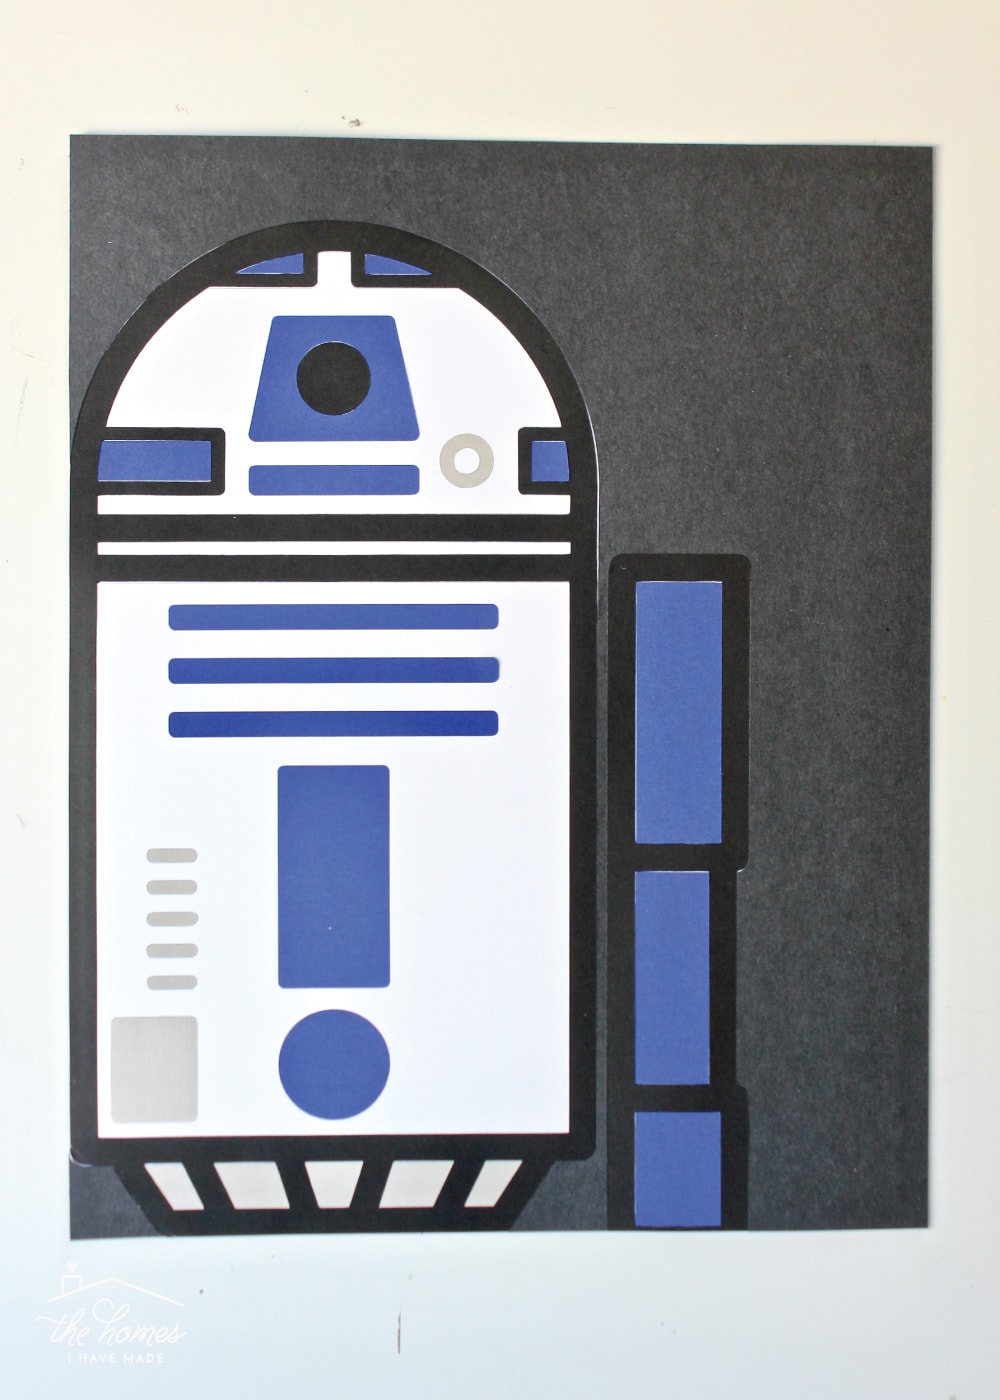 Learn how to make this DIY Star Wars Art with a Cricut Explore and cardstock!